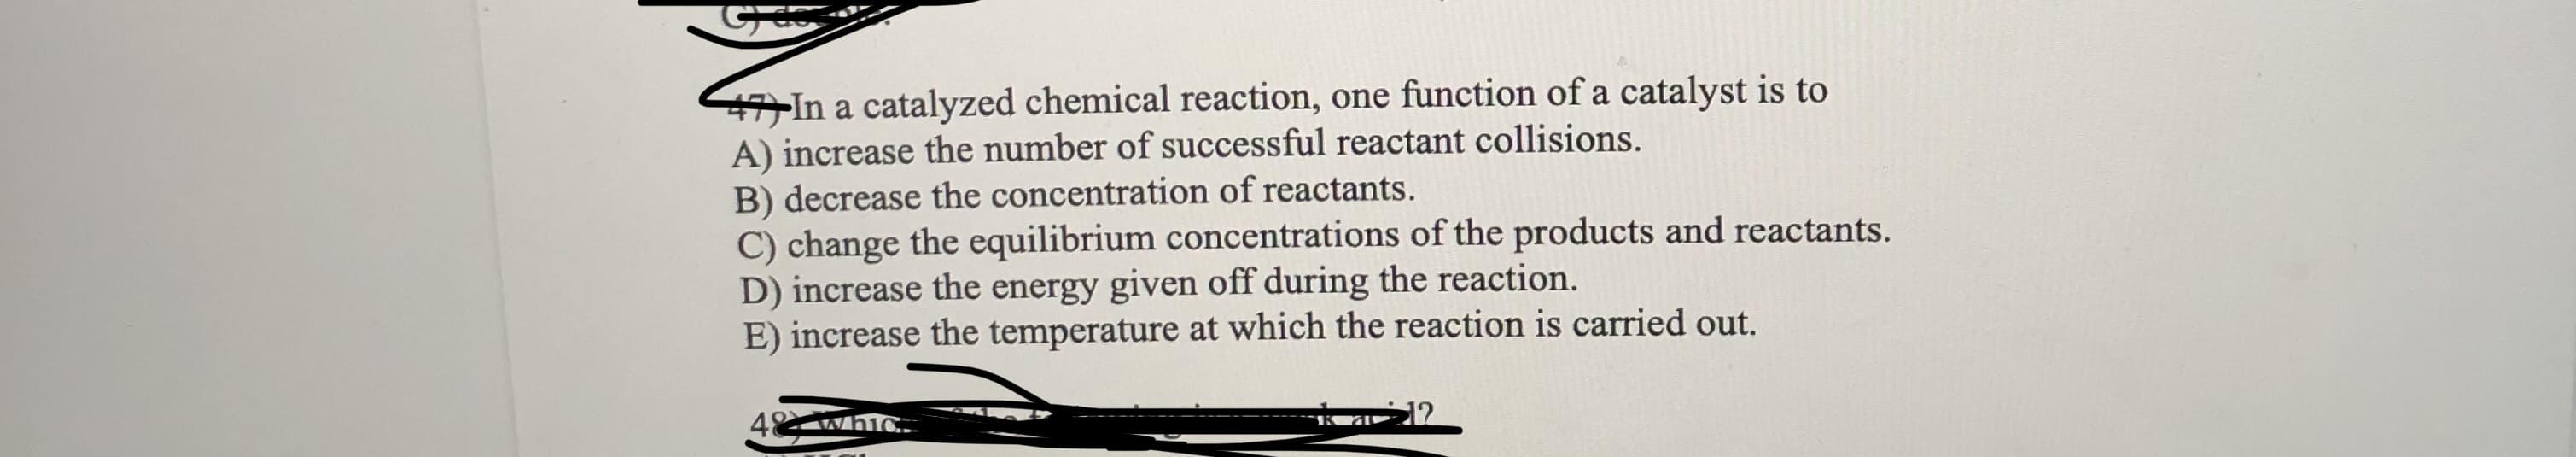 47)In a catalyzed chemical reaction, one function of a catalyst is to
A) increase the number of successful reactant collisions.
B) decrease the concentration of reactants.
C) change the equilibrium concentrations of the products and reactants.
D) increase the energy given off during the reaction.
E) increase the temperature at which the reaction is carried out.
